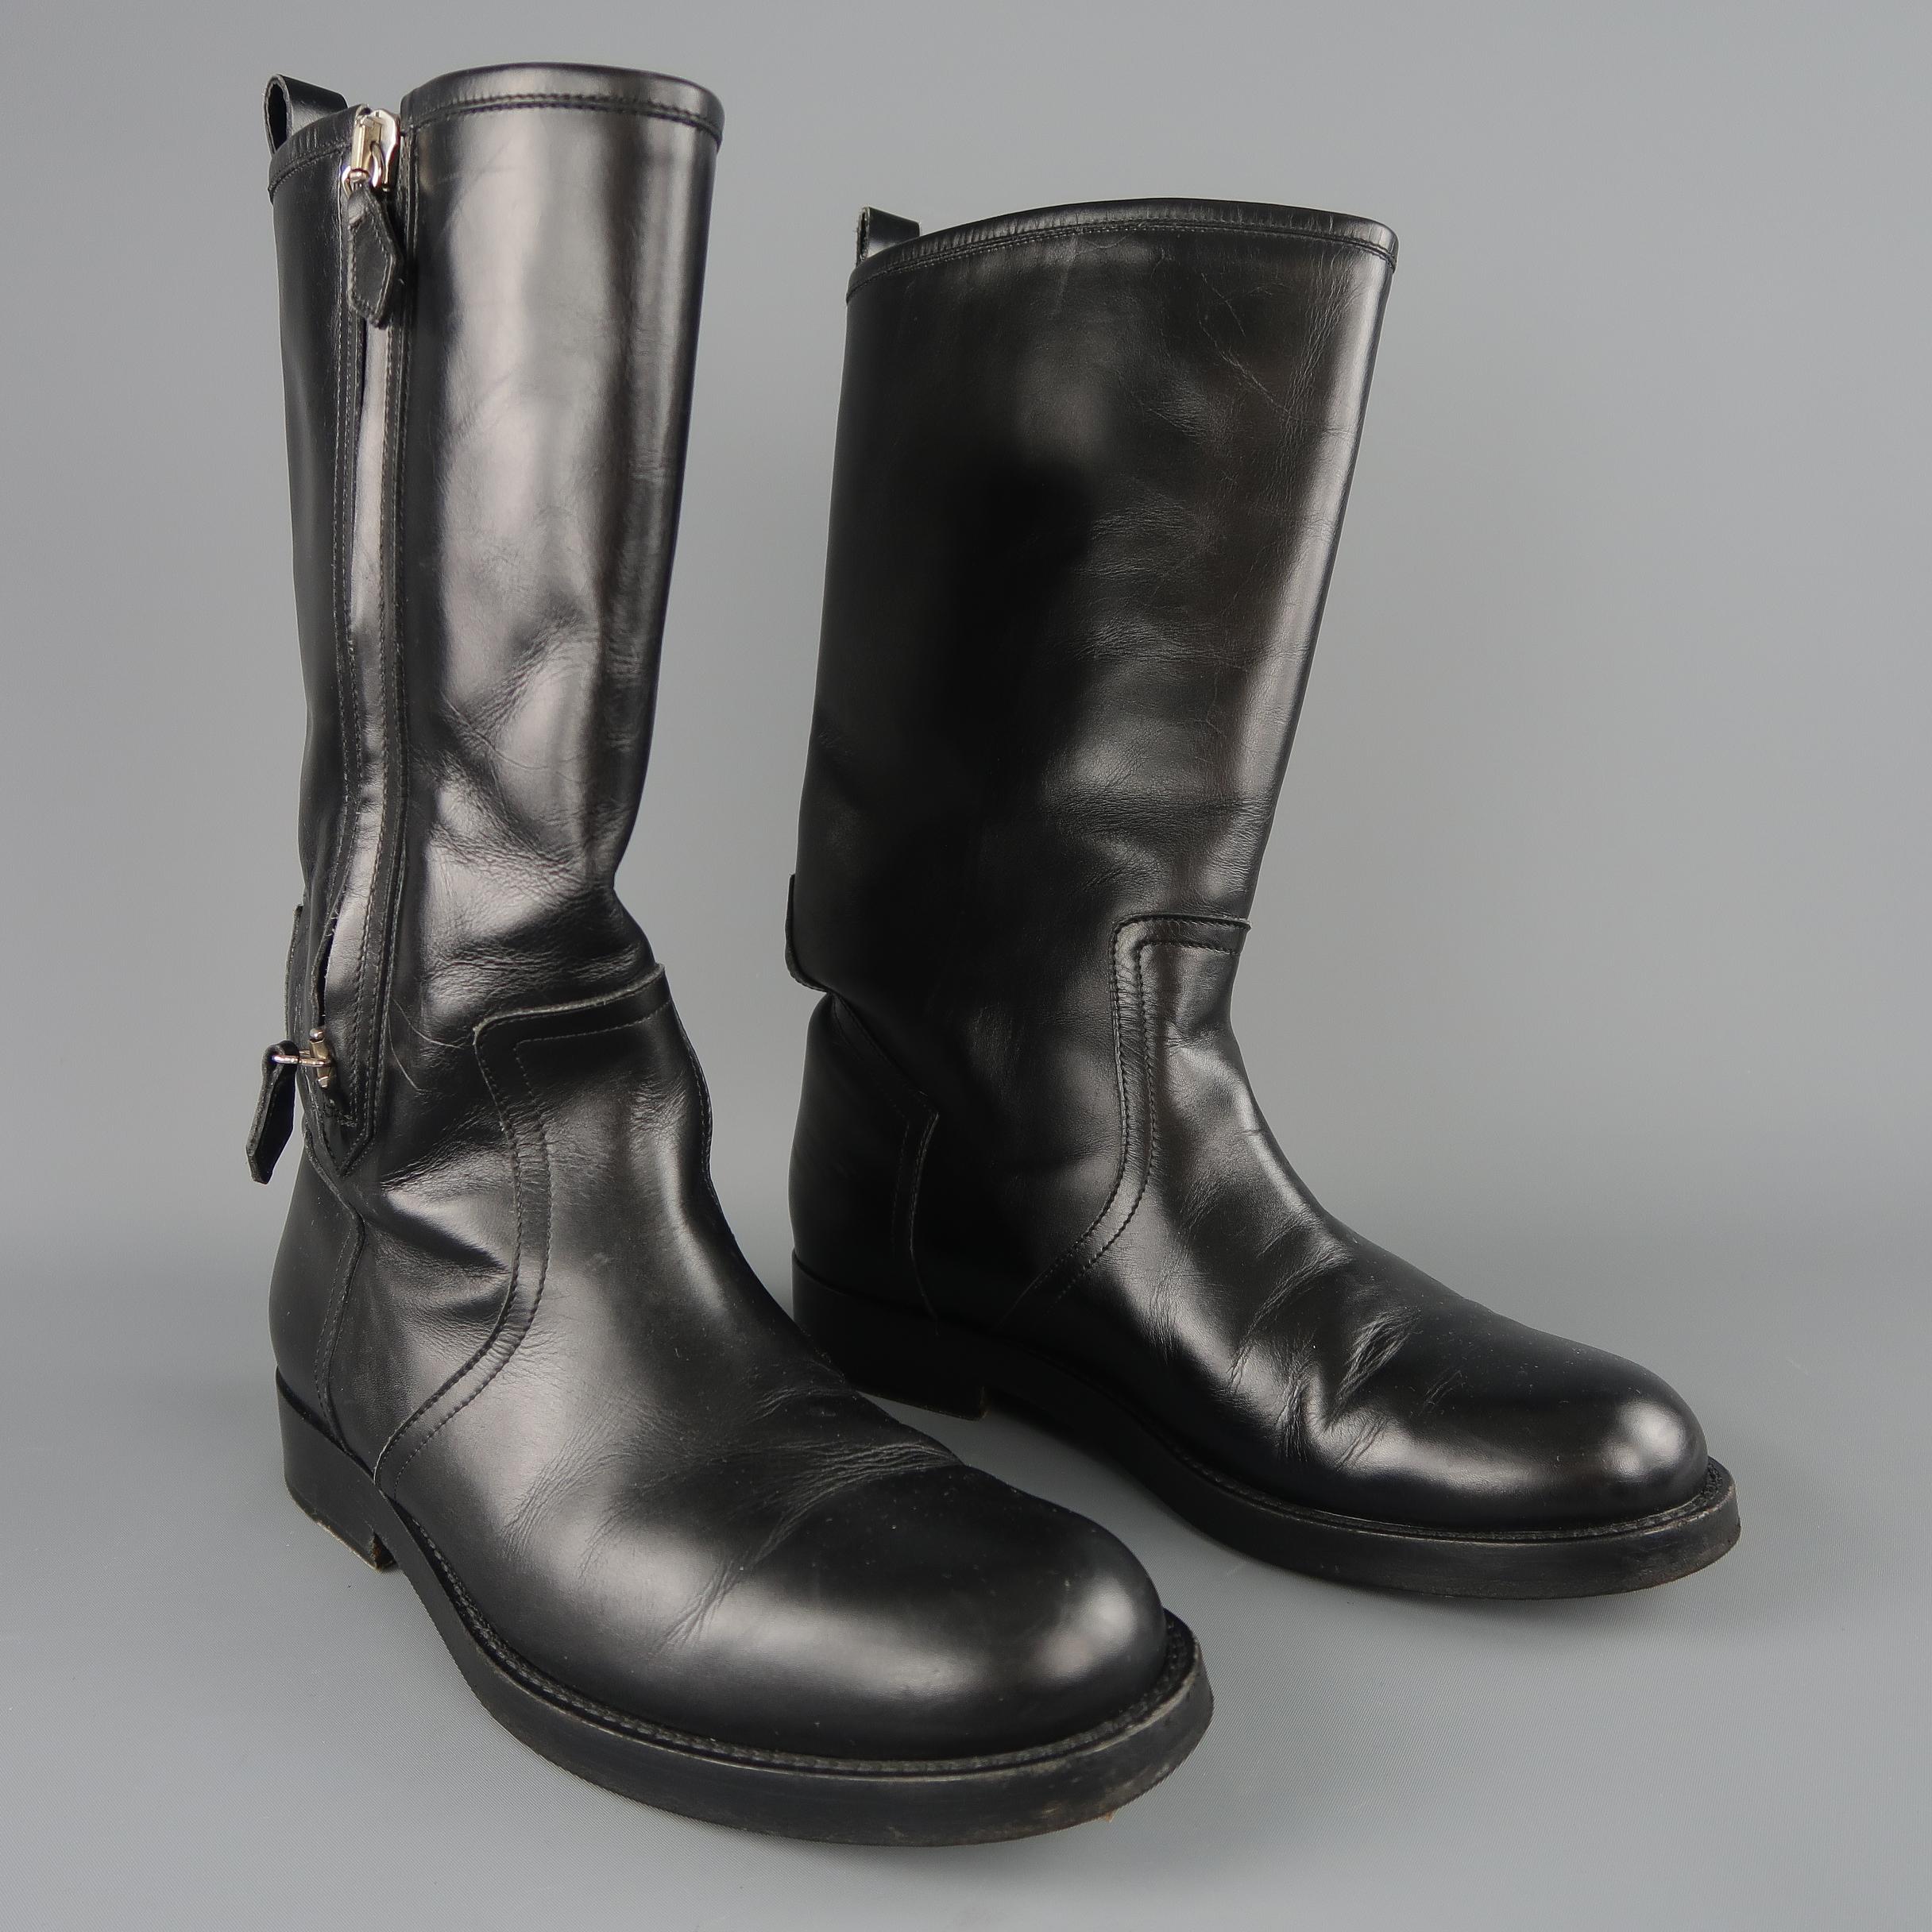 Ralph Lauren biker style boots come in smooth black leather with a rounded to, chunky heeled sole, and tall shaft with double zip side. Made in Italy.
 
Good Pre-Owned Condition.
Marked: UK 8.5
 
Measurements:
 
Length: 12.5 in.